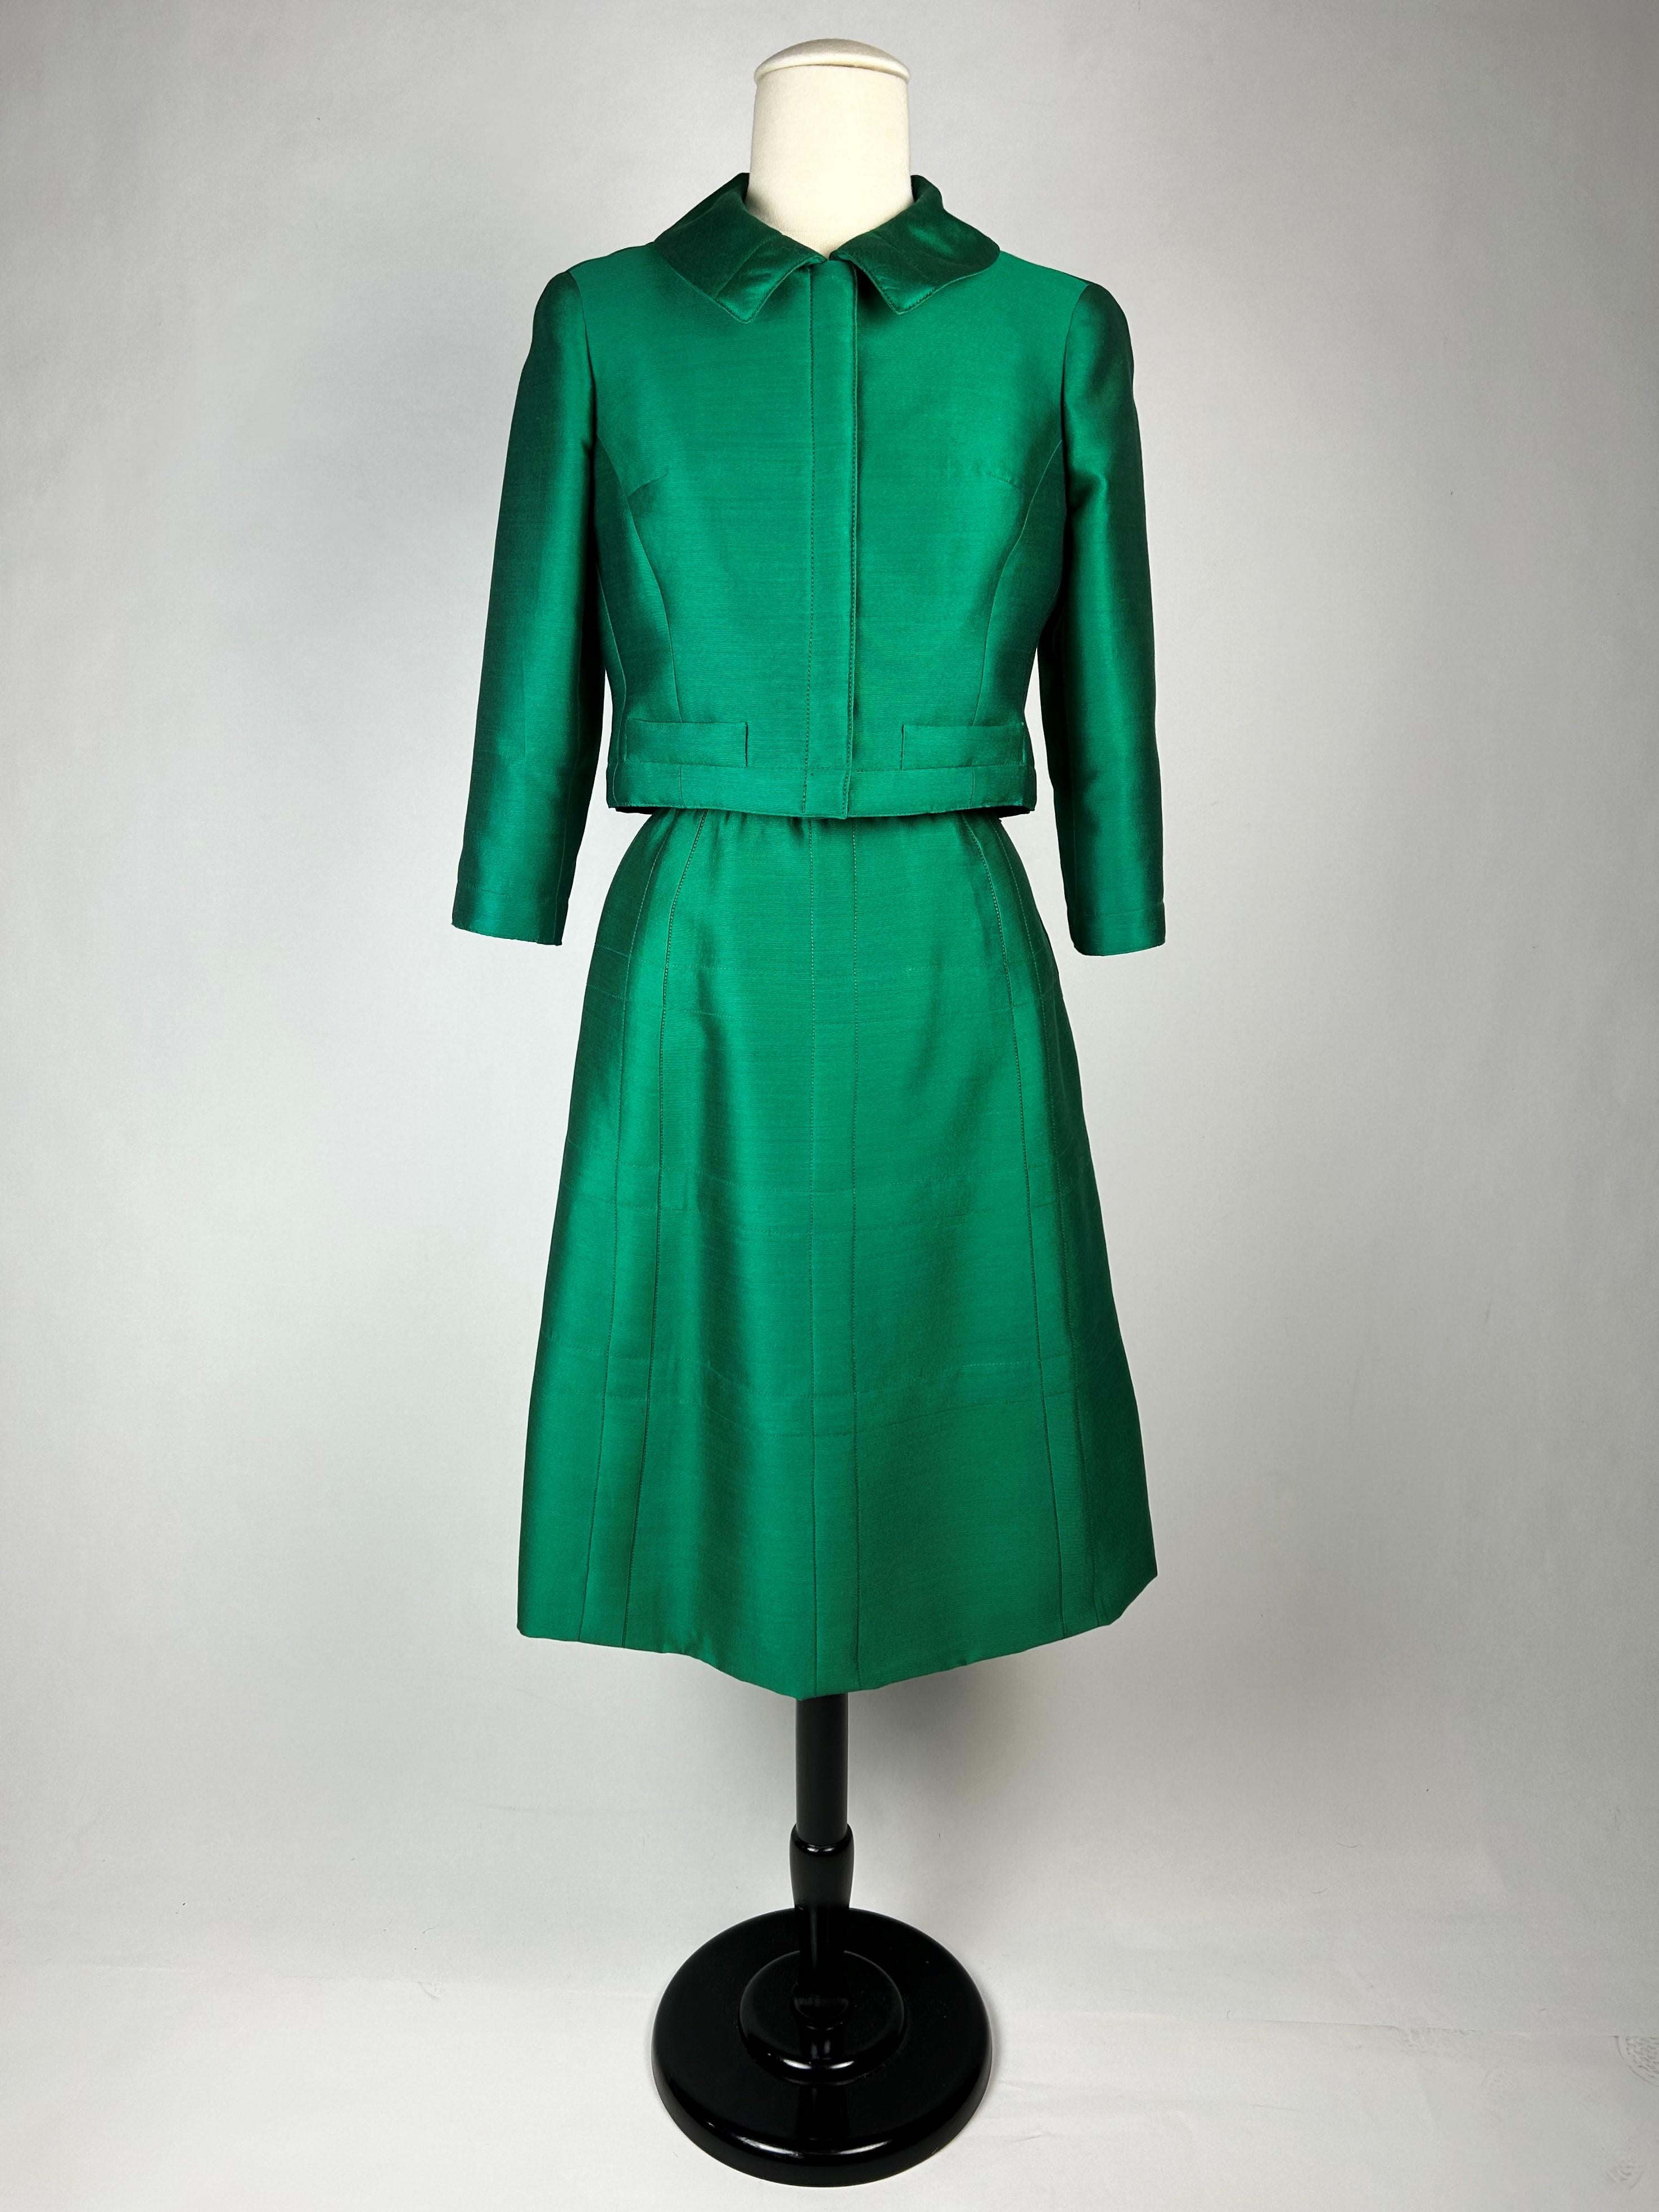 An Emerald Gazar Demi-Couture Skirt Suit by Louis Féraud Circa 1968-1972 For Sale 4